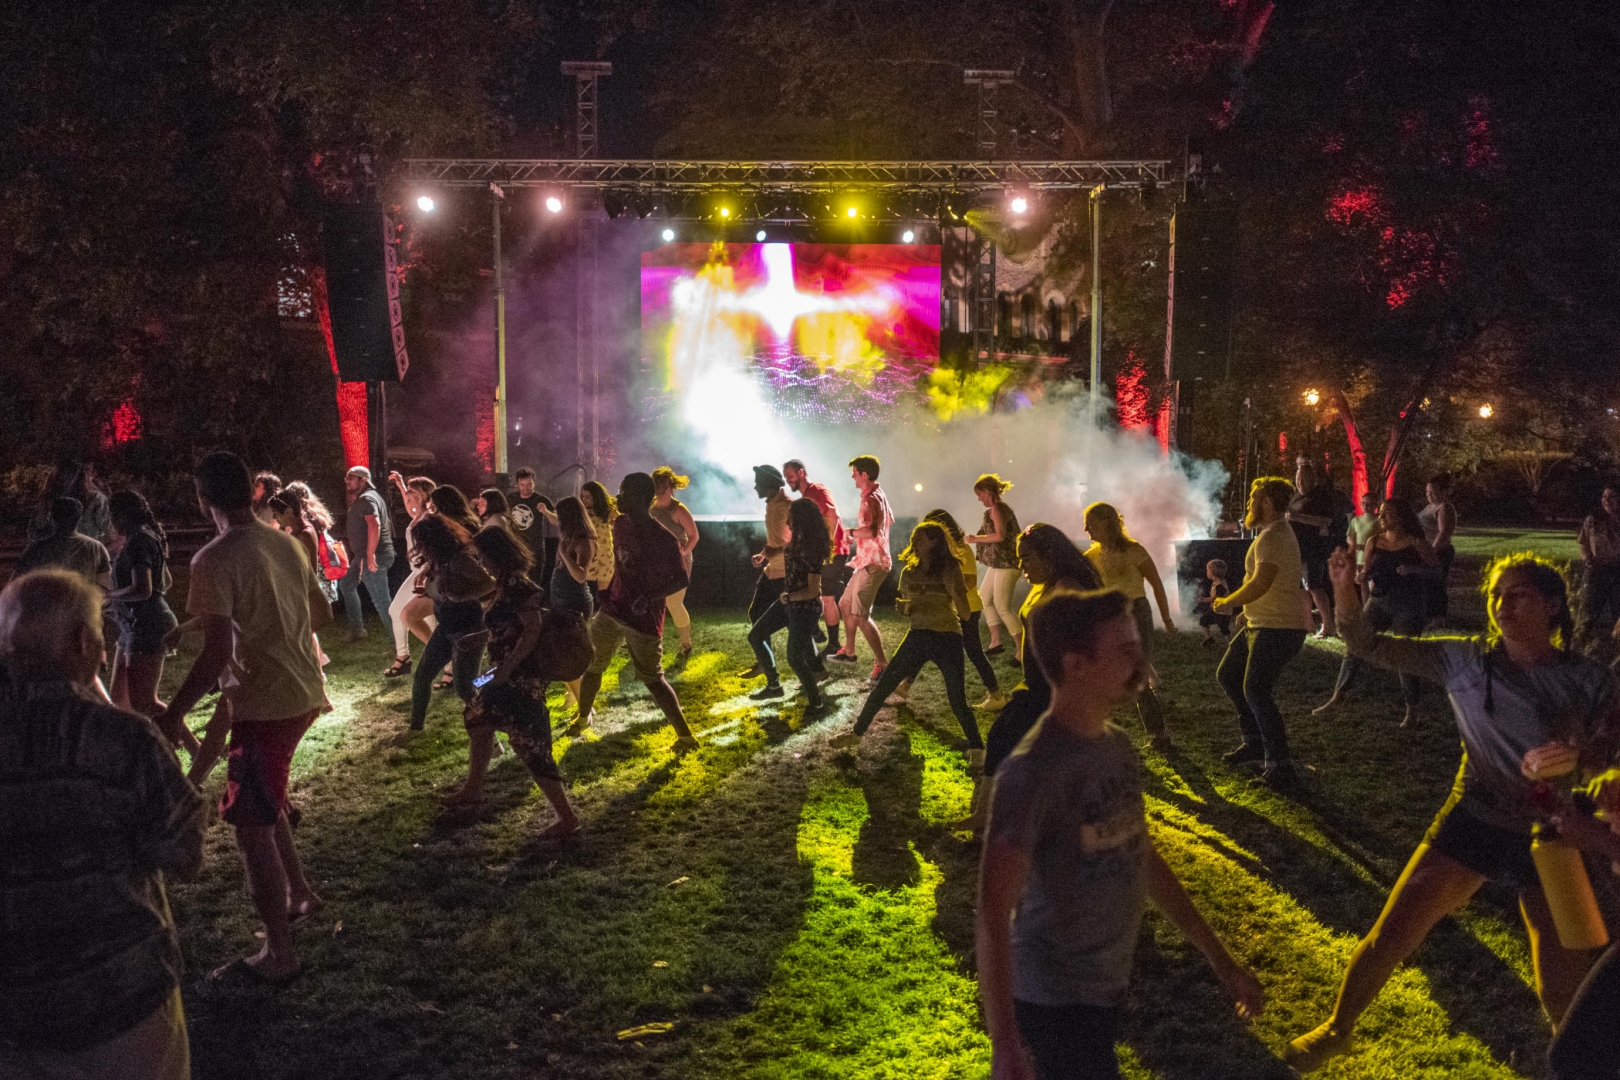 A large crowd of people dance in front of strobe lights and a smoke machine on Kendall Lawn.